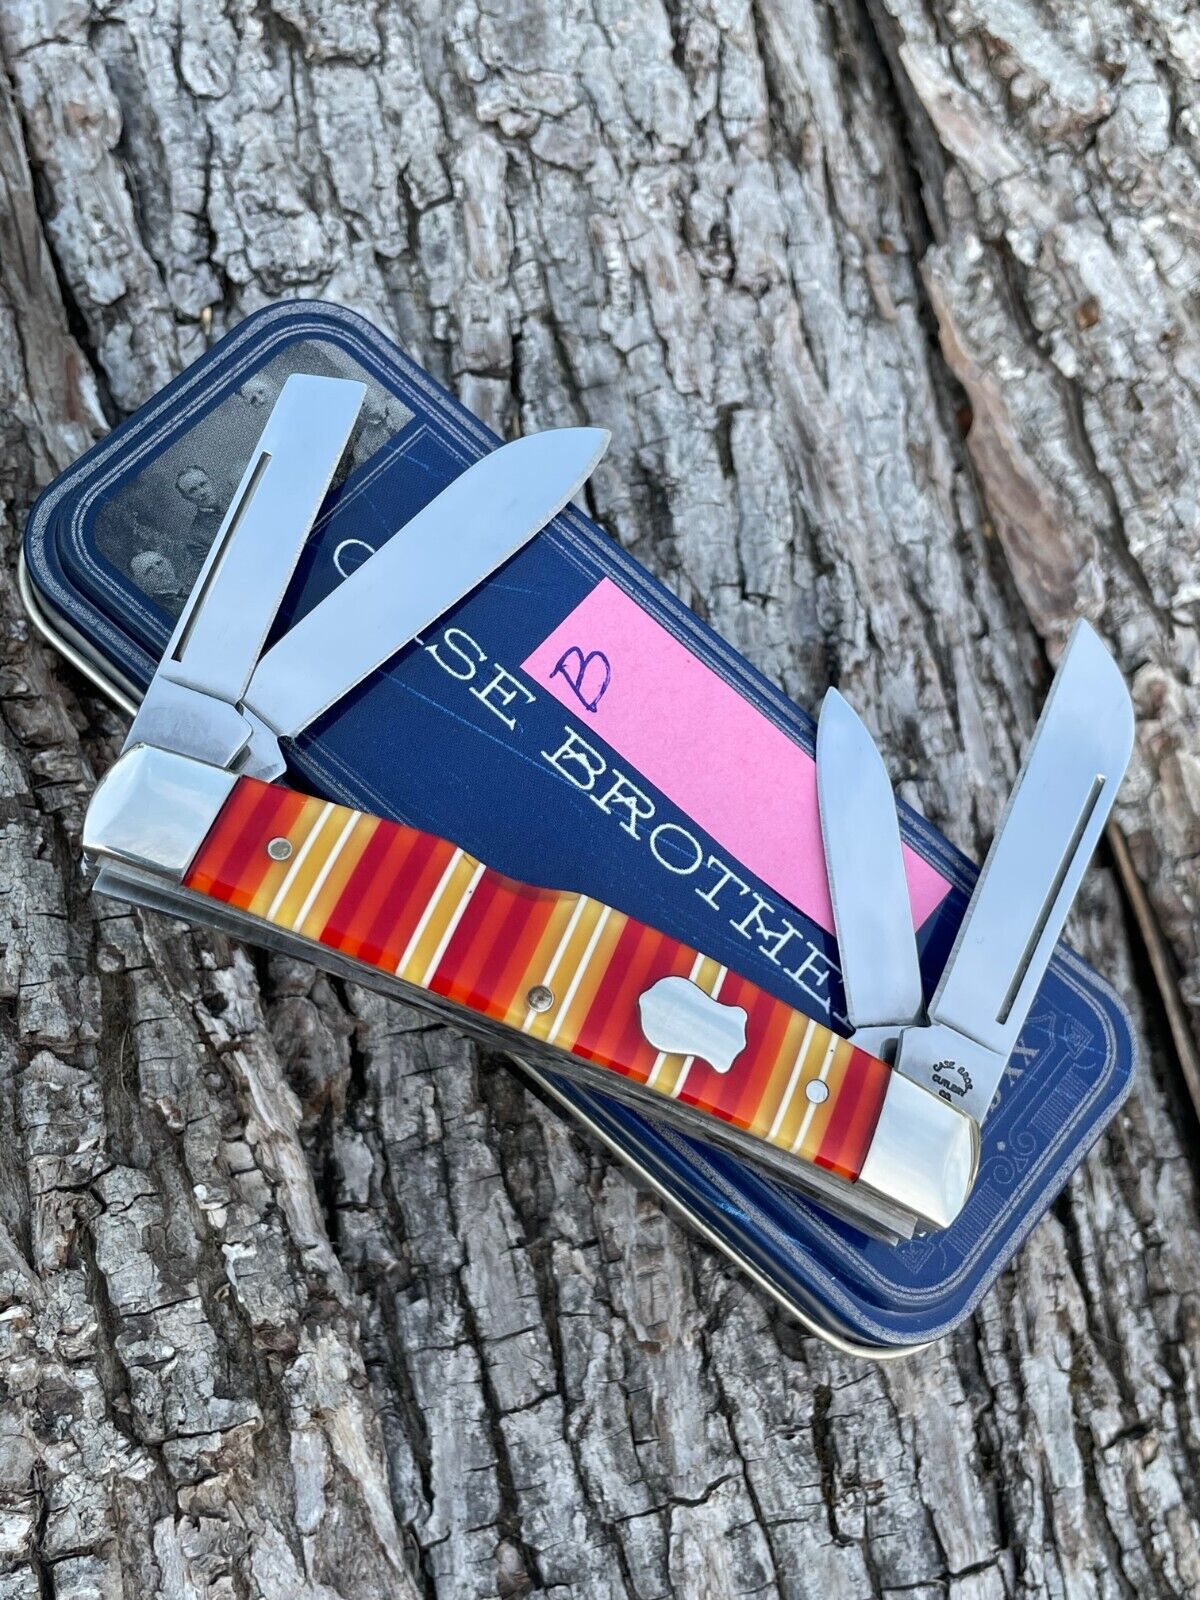 CASE BROS *b CANDY STRIPE SYNTHETIC 052 PATTERN CONGRESS KNIFE KNIVES